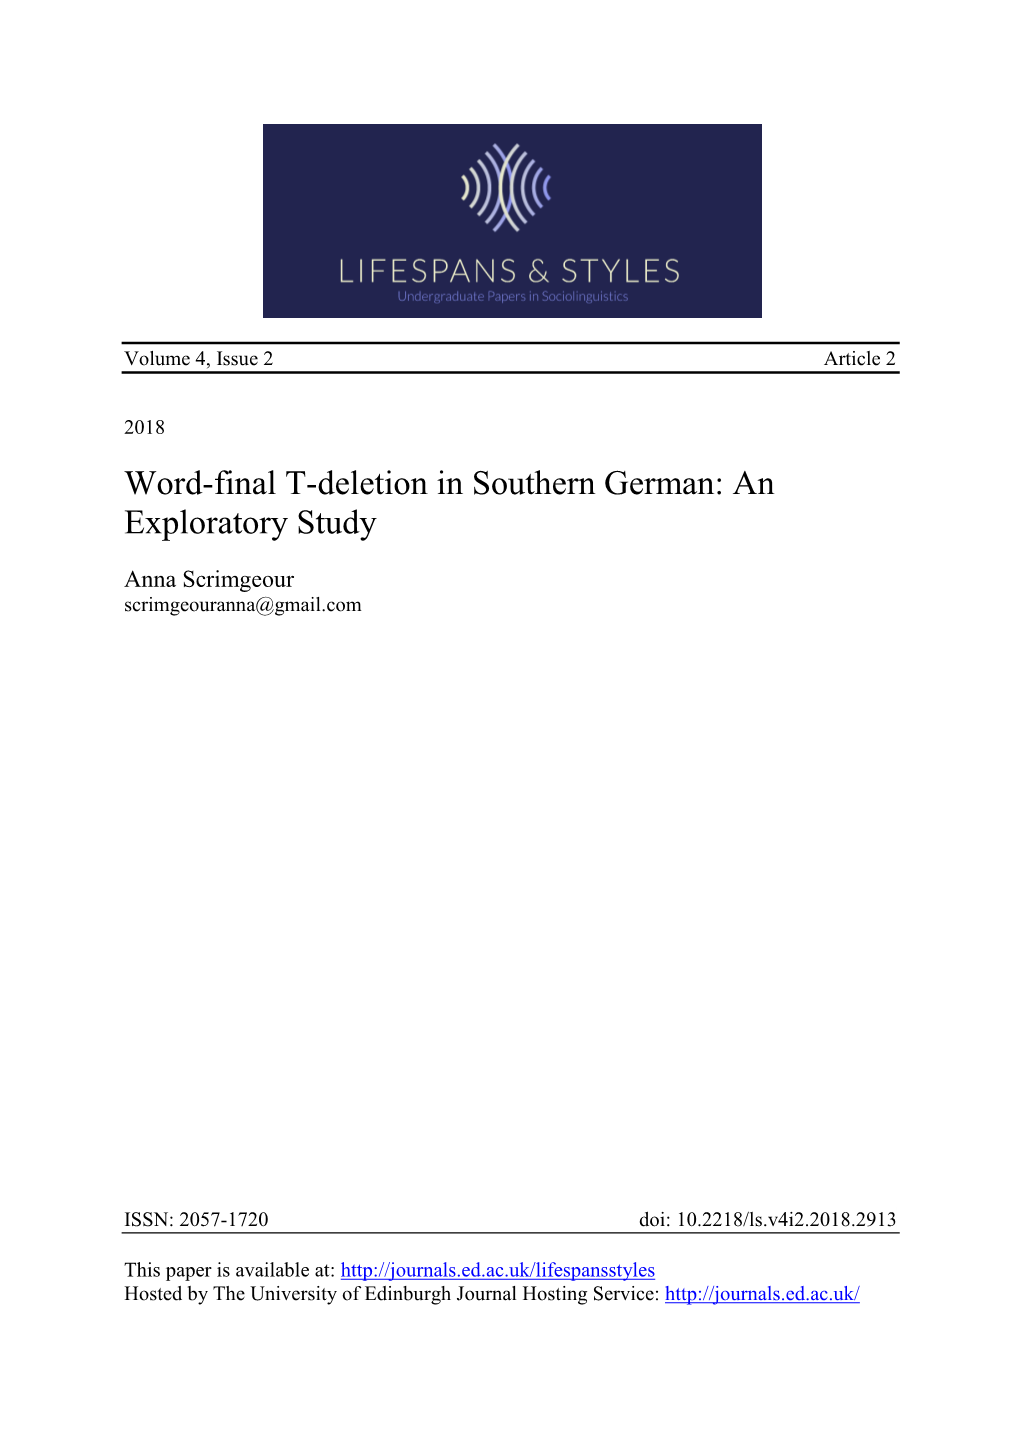 Word-Final T-Deletion in Southern German: an Exploratory Study